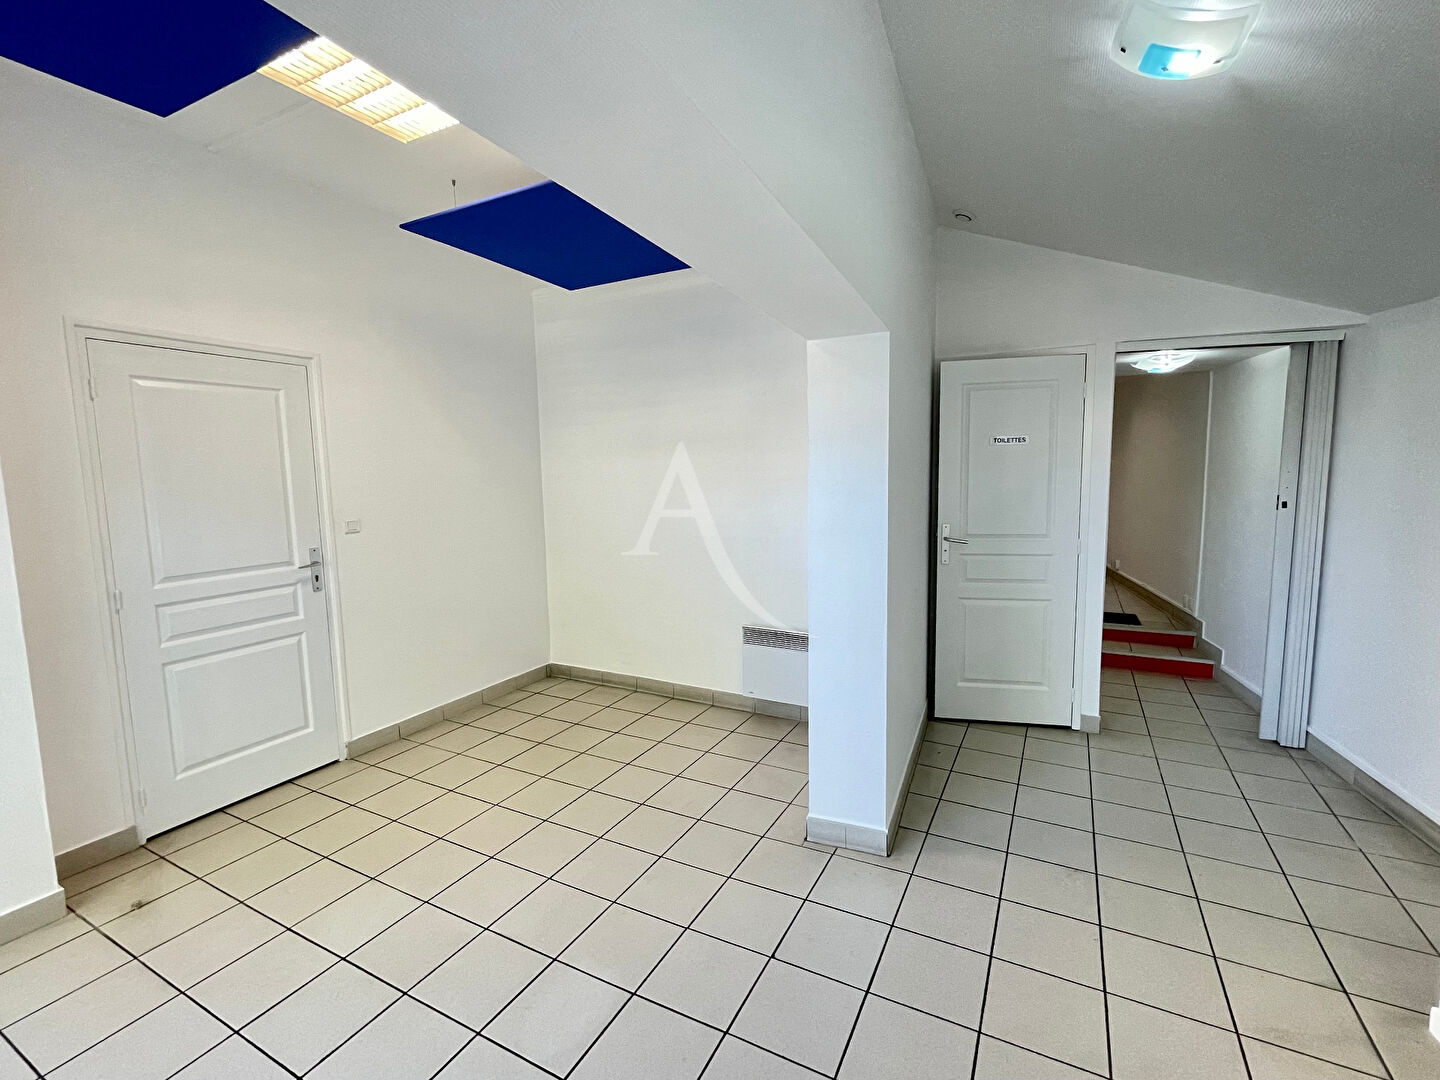 Local industriel  - 44m² - ANGERS